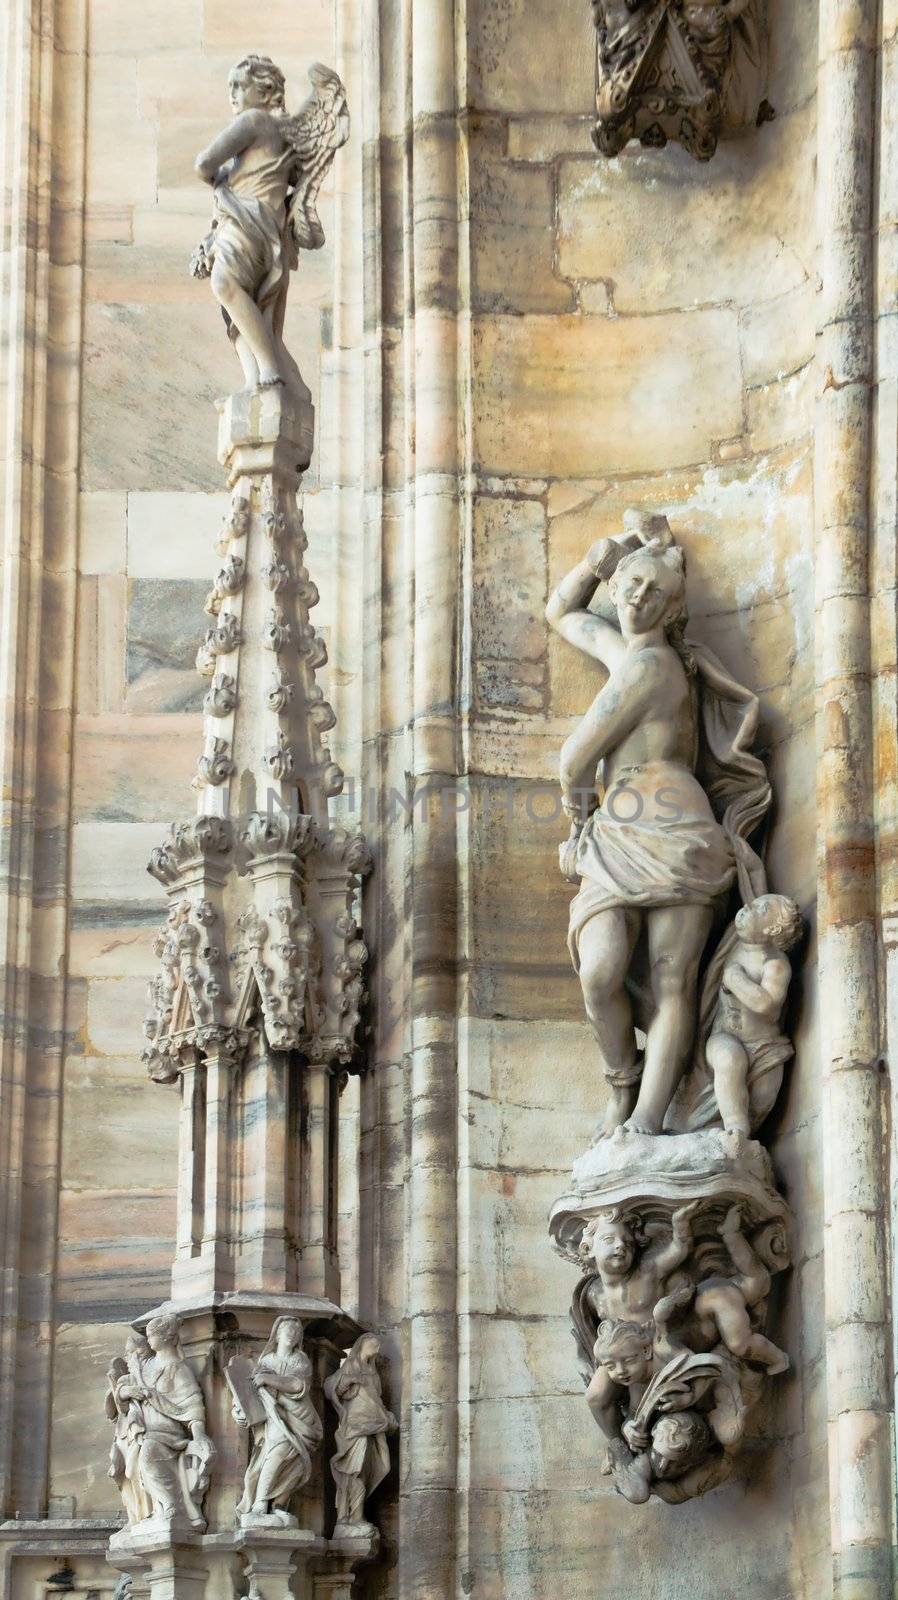 Fragment of of the architectural decoration of the Cathedral Duomo in Milan